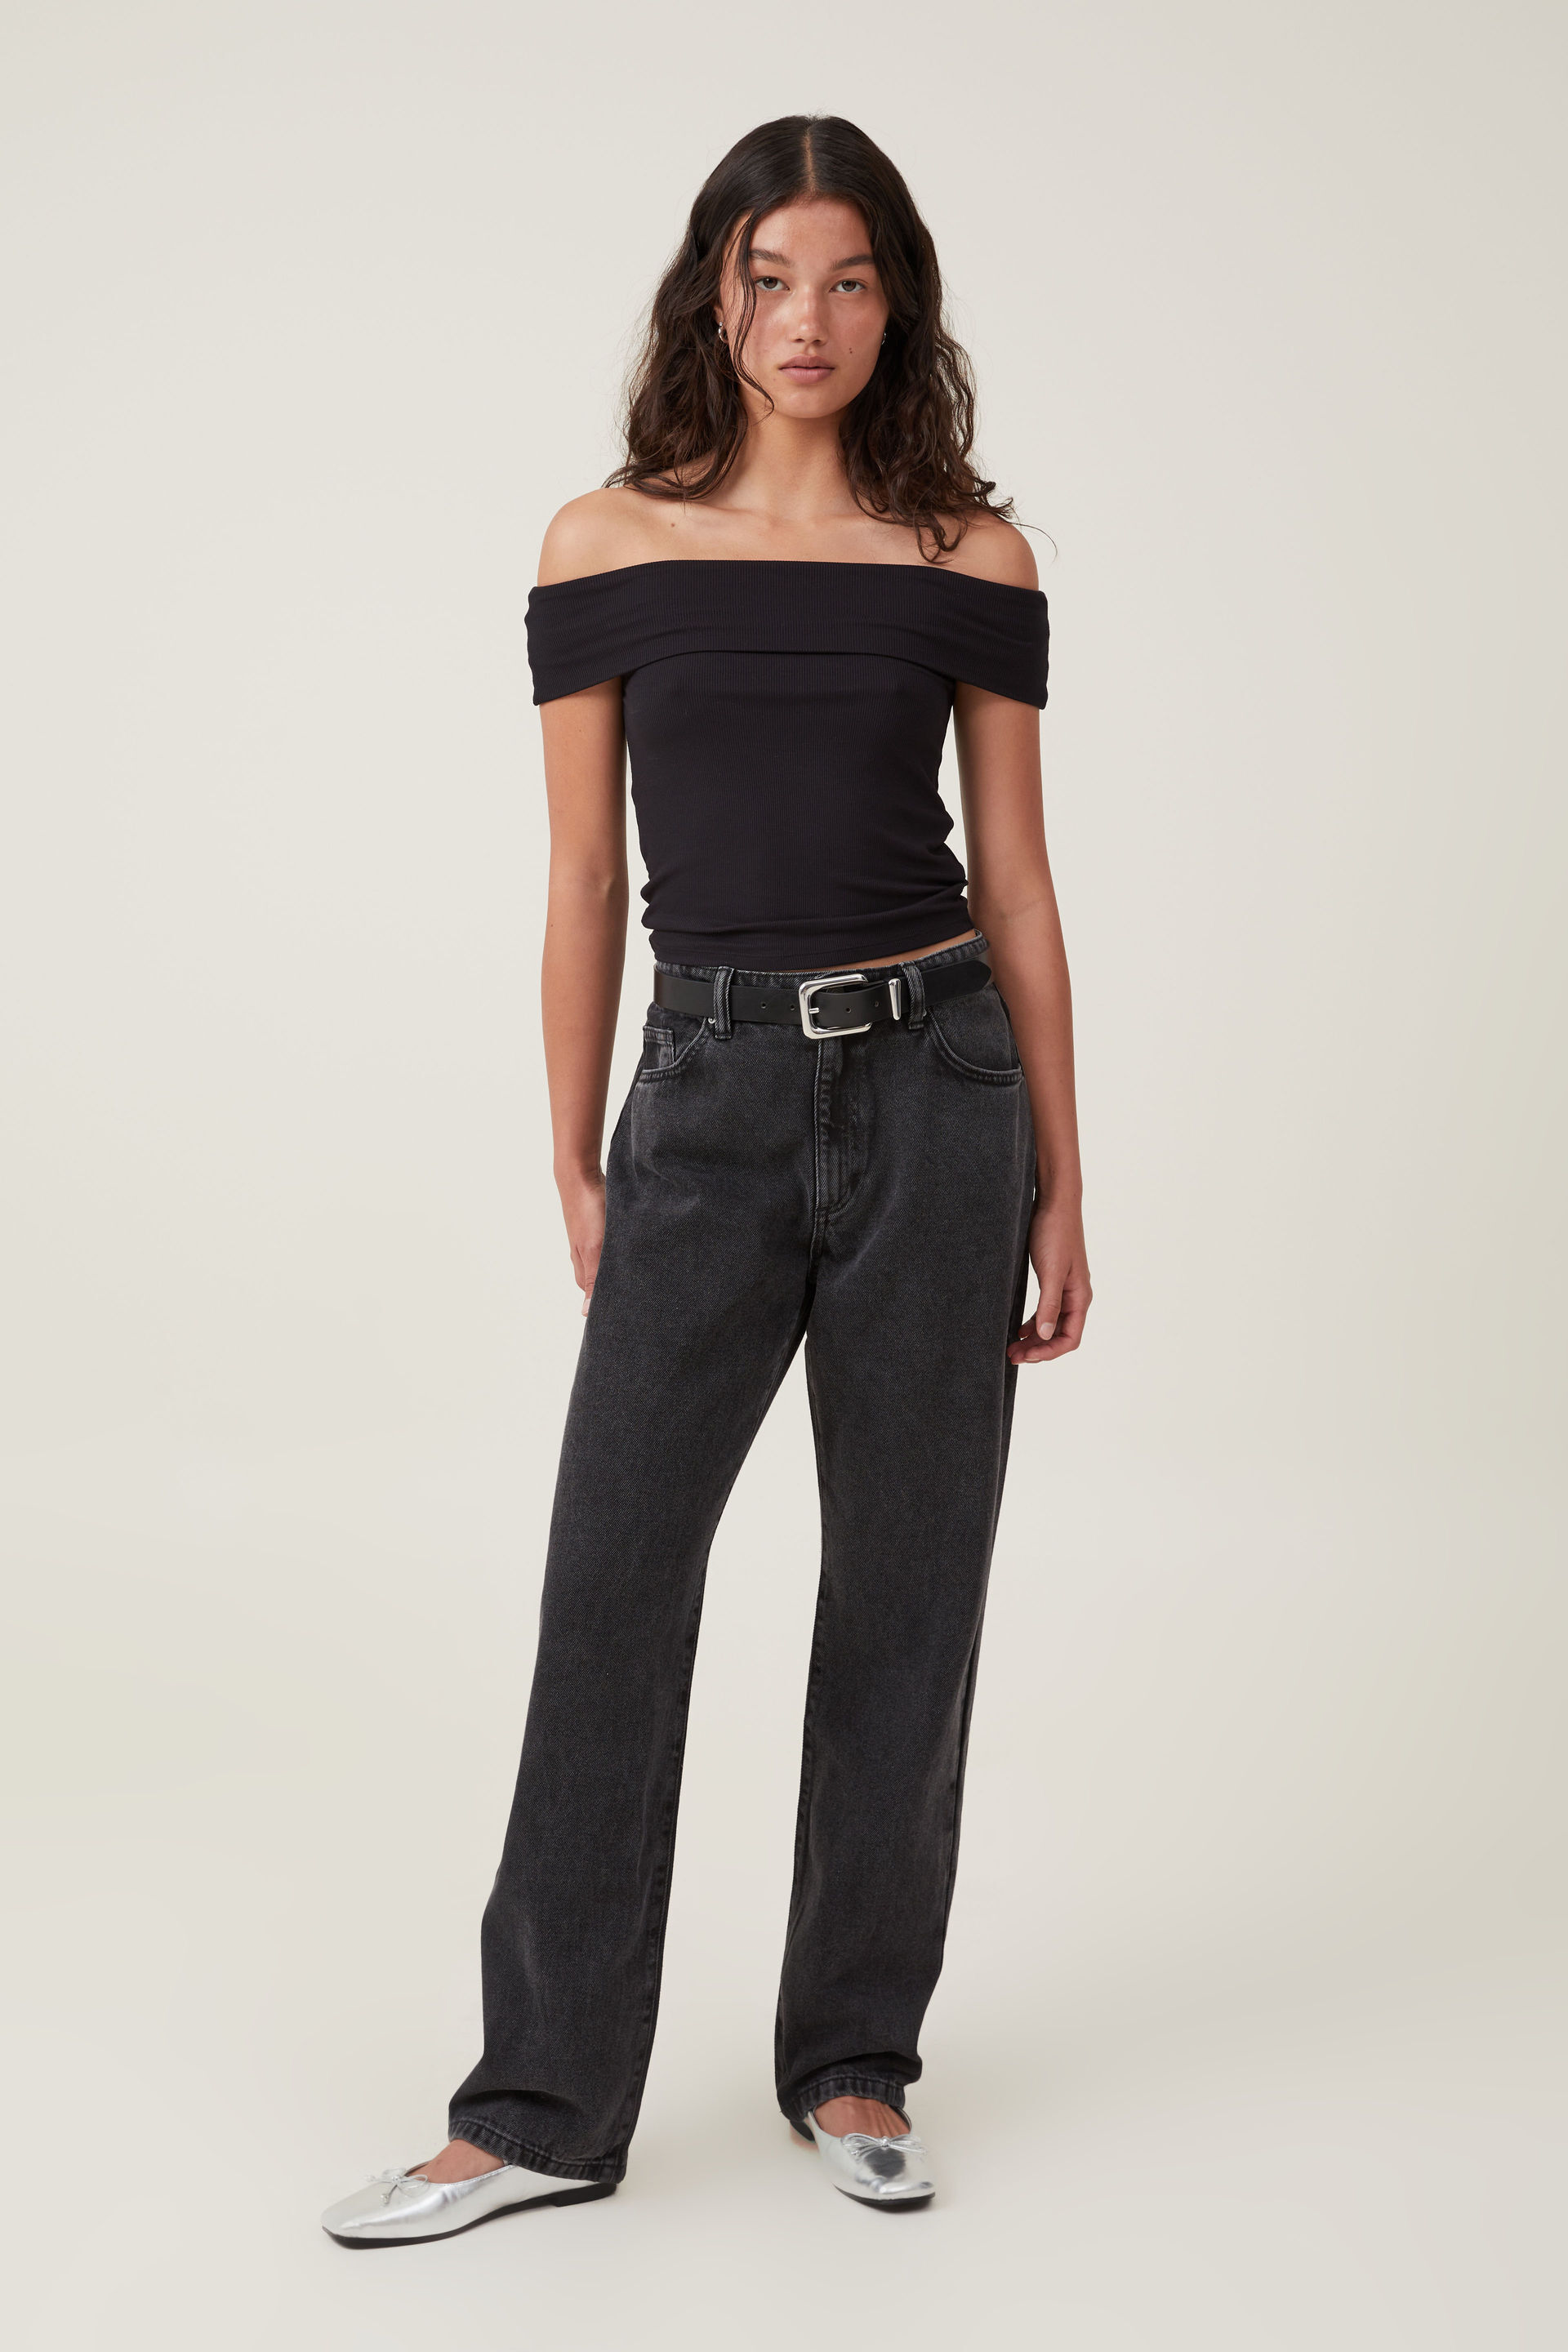 Women's Relaxed & Straight Legged Jeans | Cotton On USA